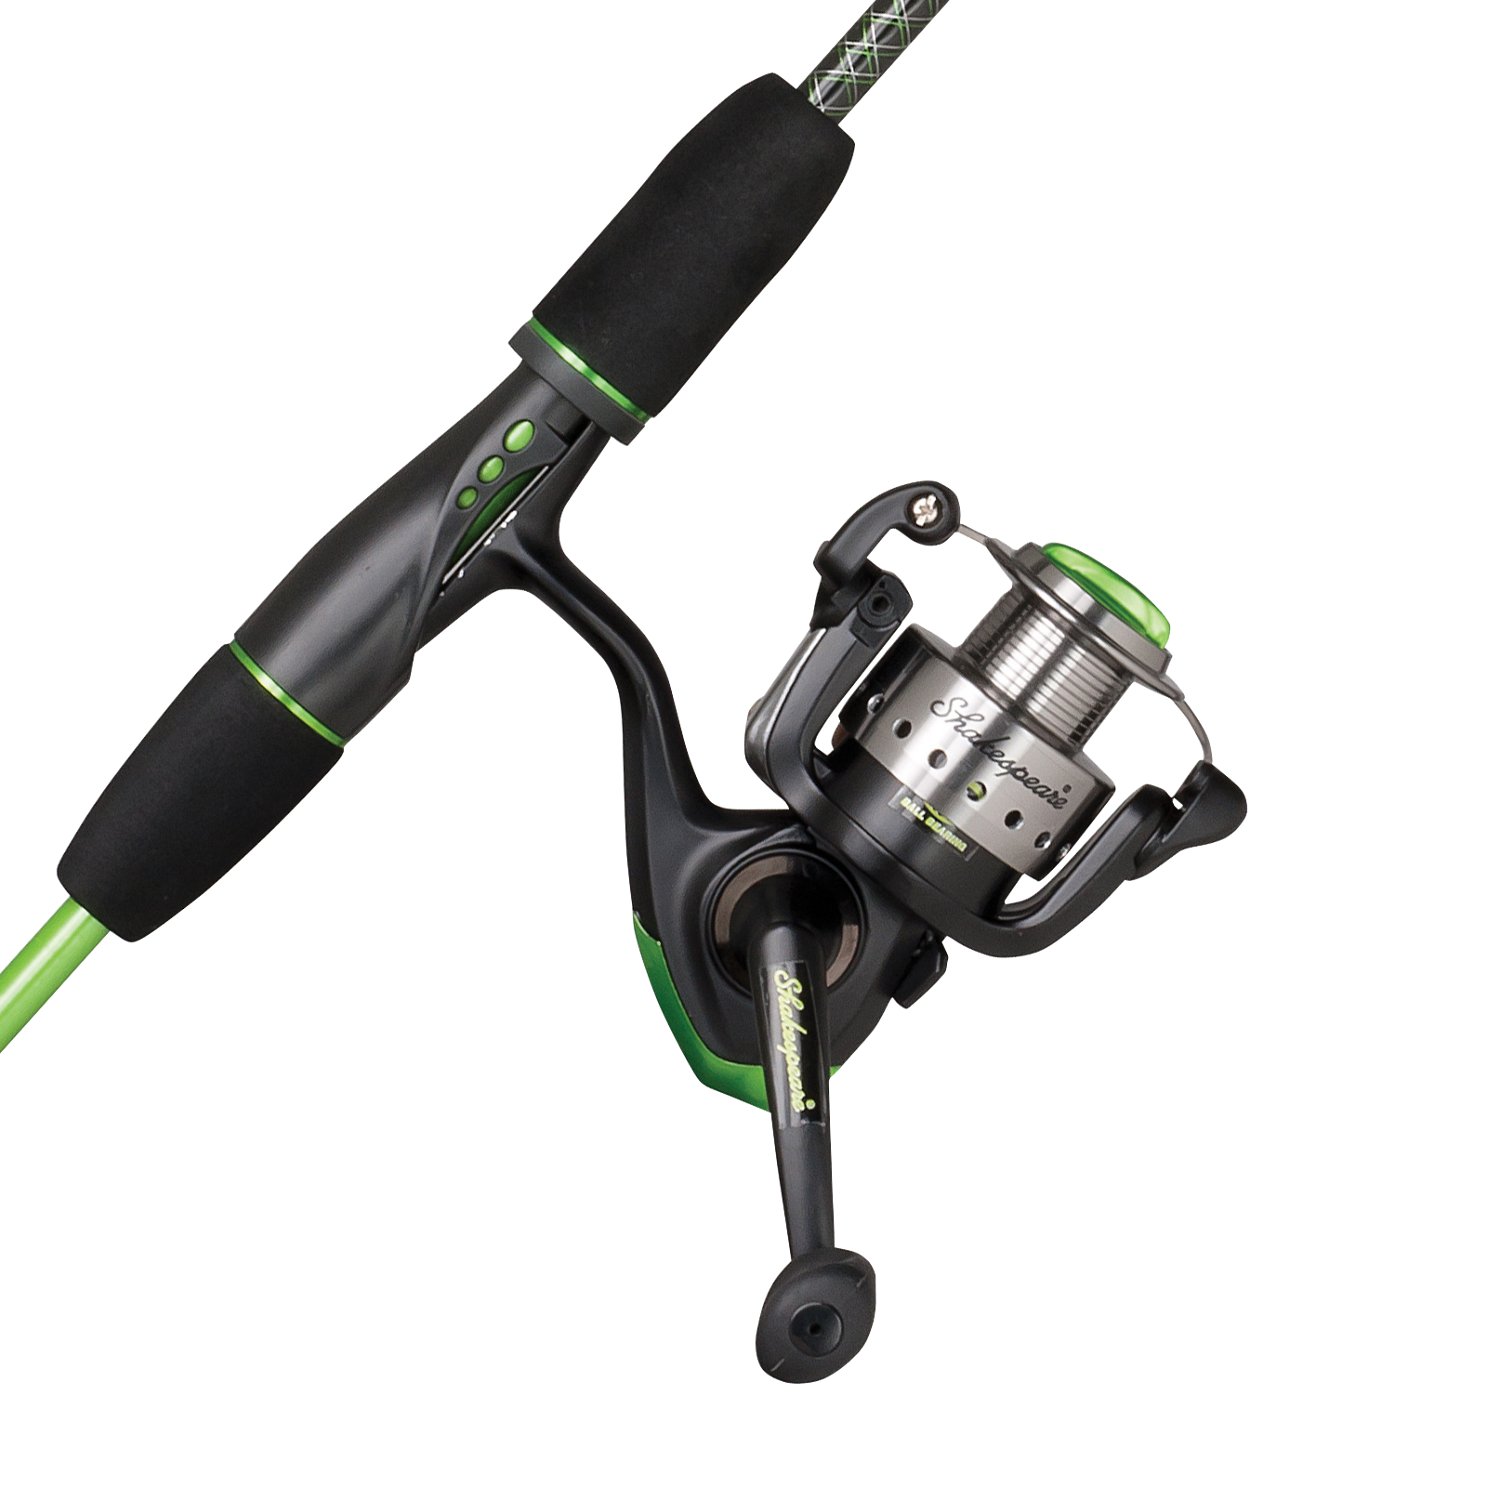 https://academy.scene7.com/is/image/academy//fishing-rod---reel-combos/ugly-stik-gx2-spinning-youth-combo-usythsp30cbo-/37b2335b4a13476e91237451013e2d81